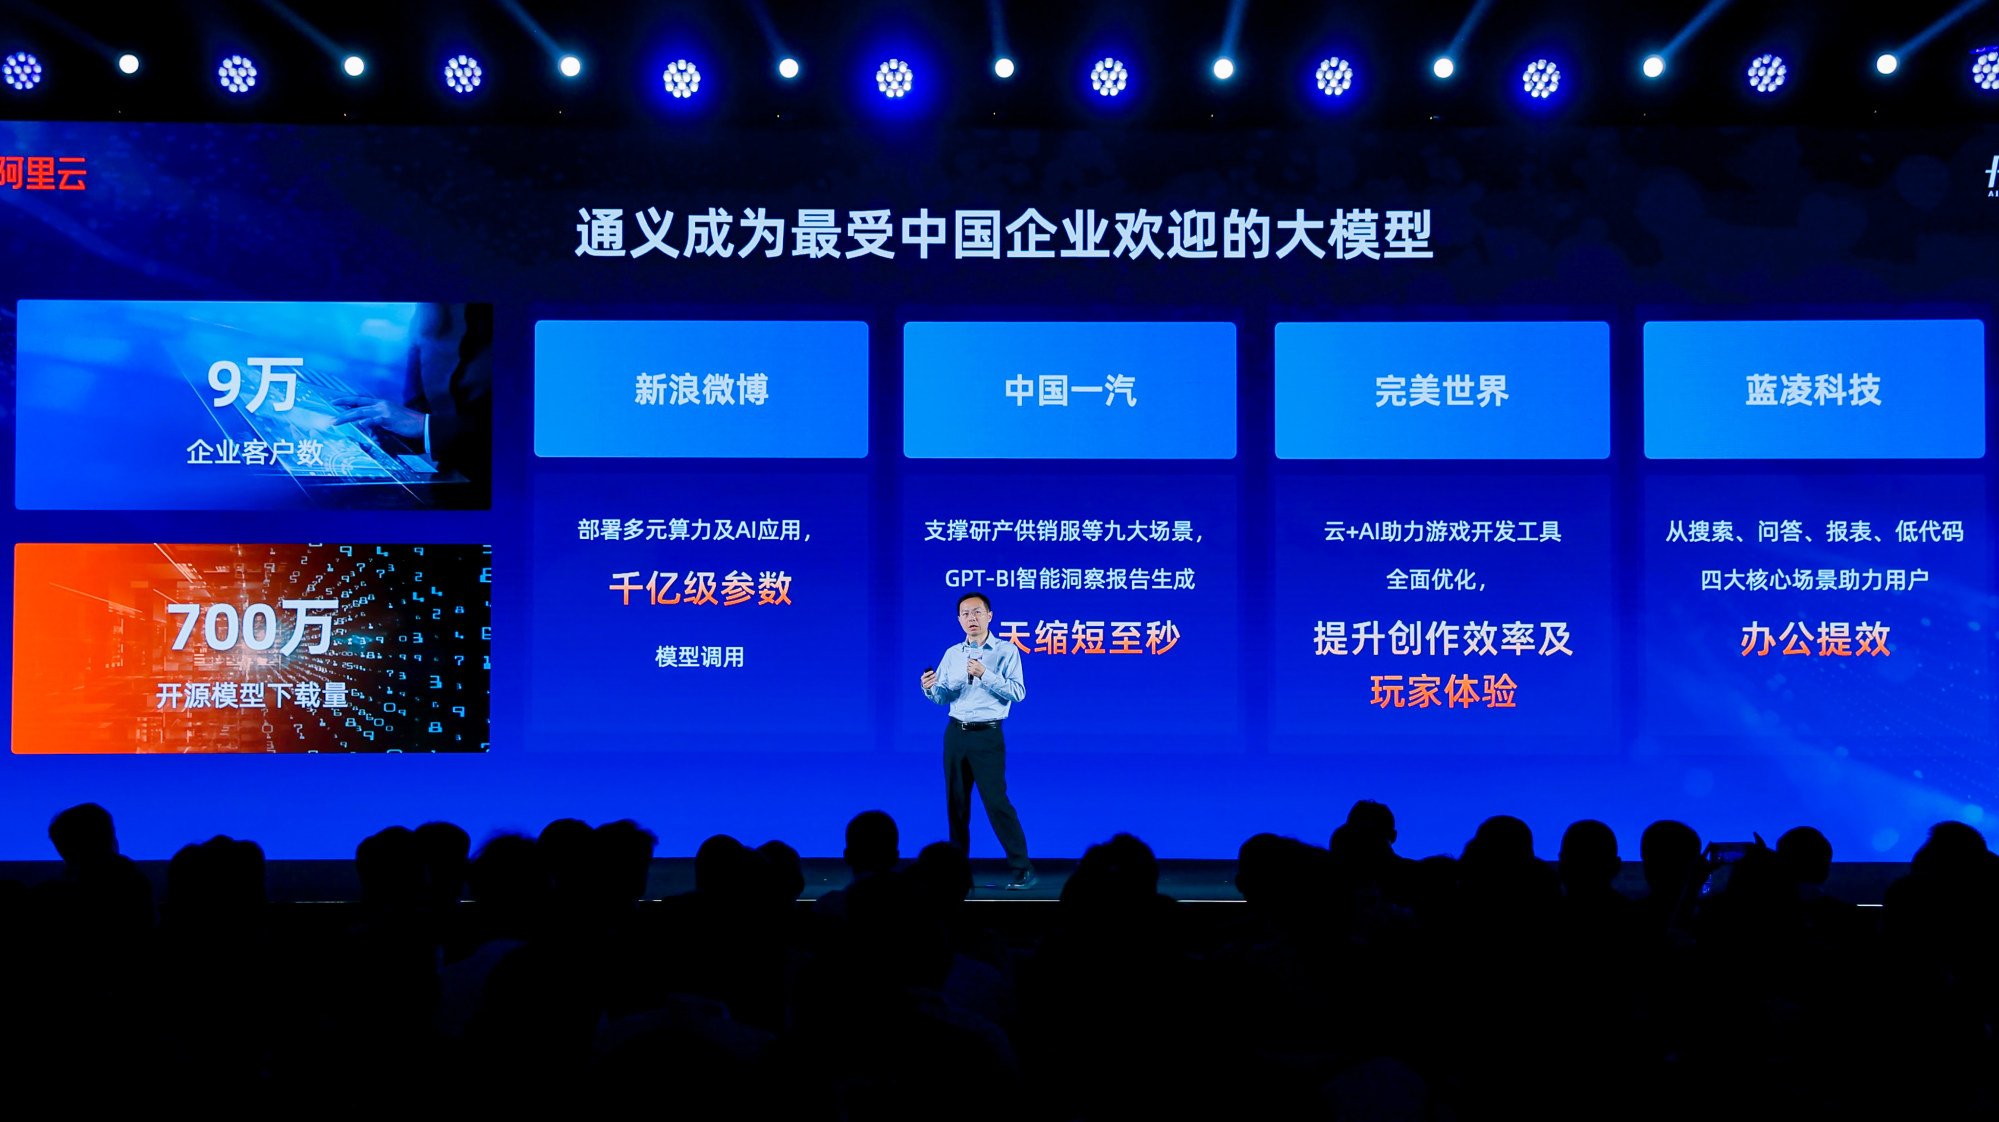 Alibaba Cloud chief technology officer Zhou Jingren said in May that the Tongyi Qianwen large language model family has been adopted by more than 90,000 corporate clients. Photo: Handout